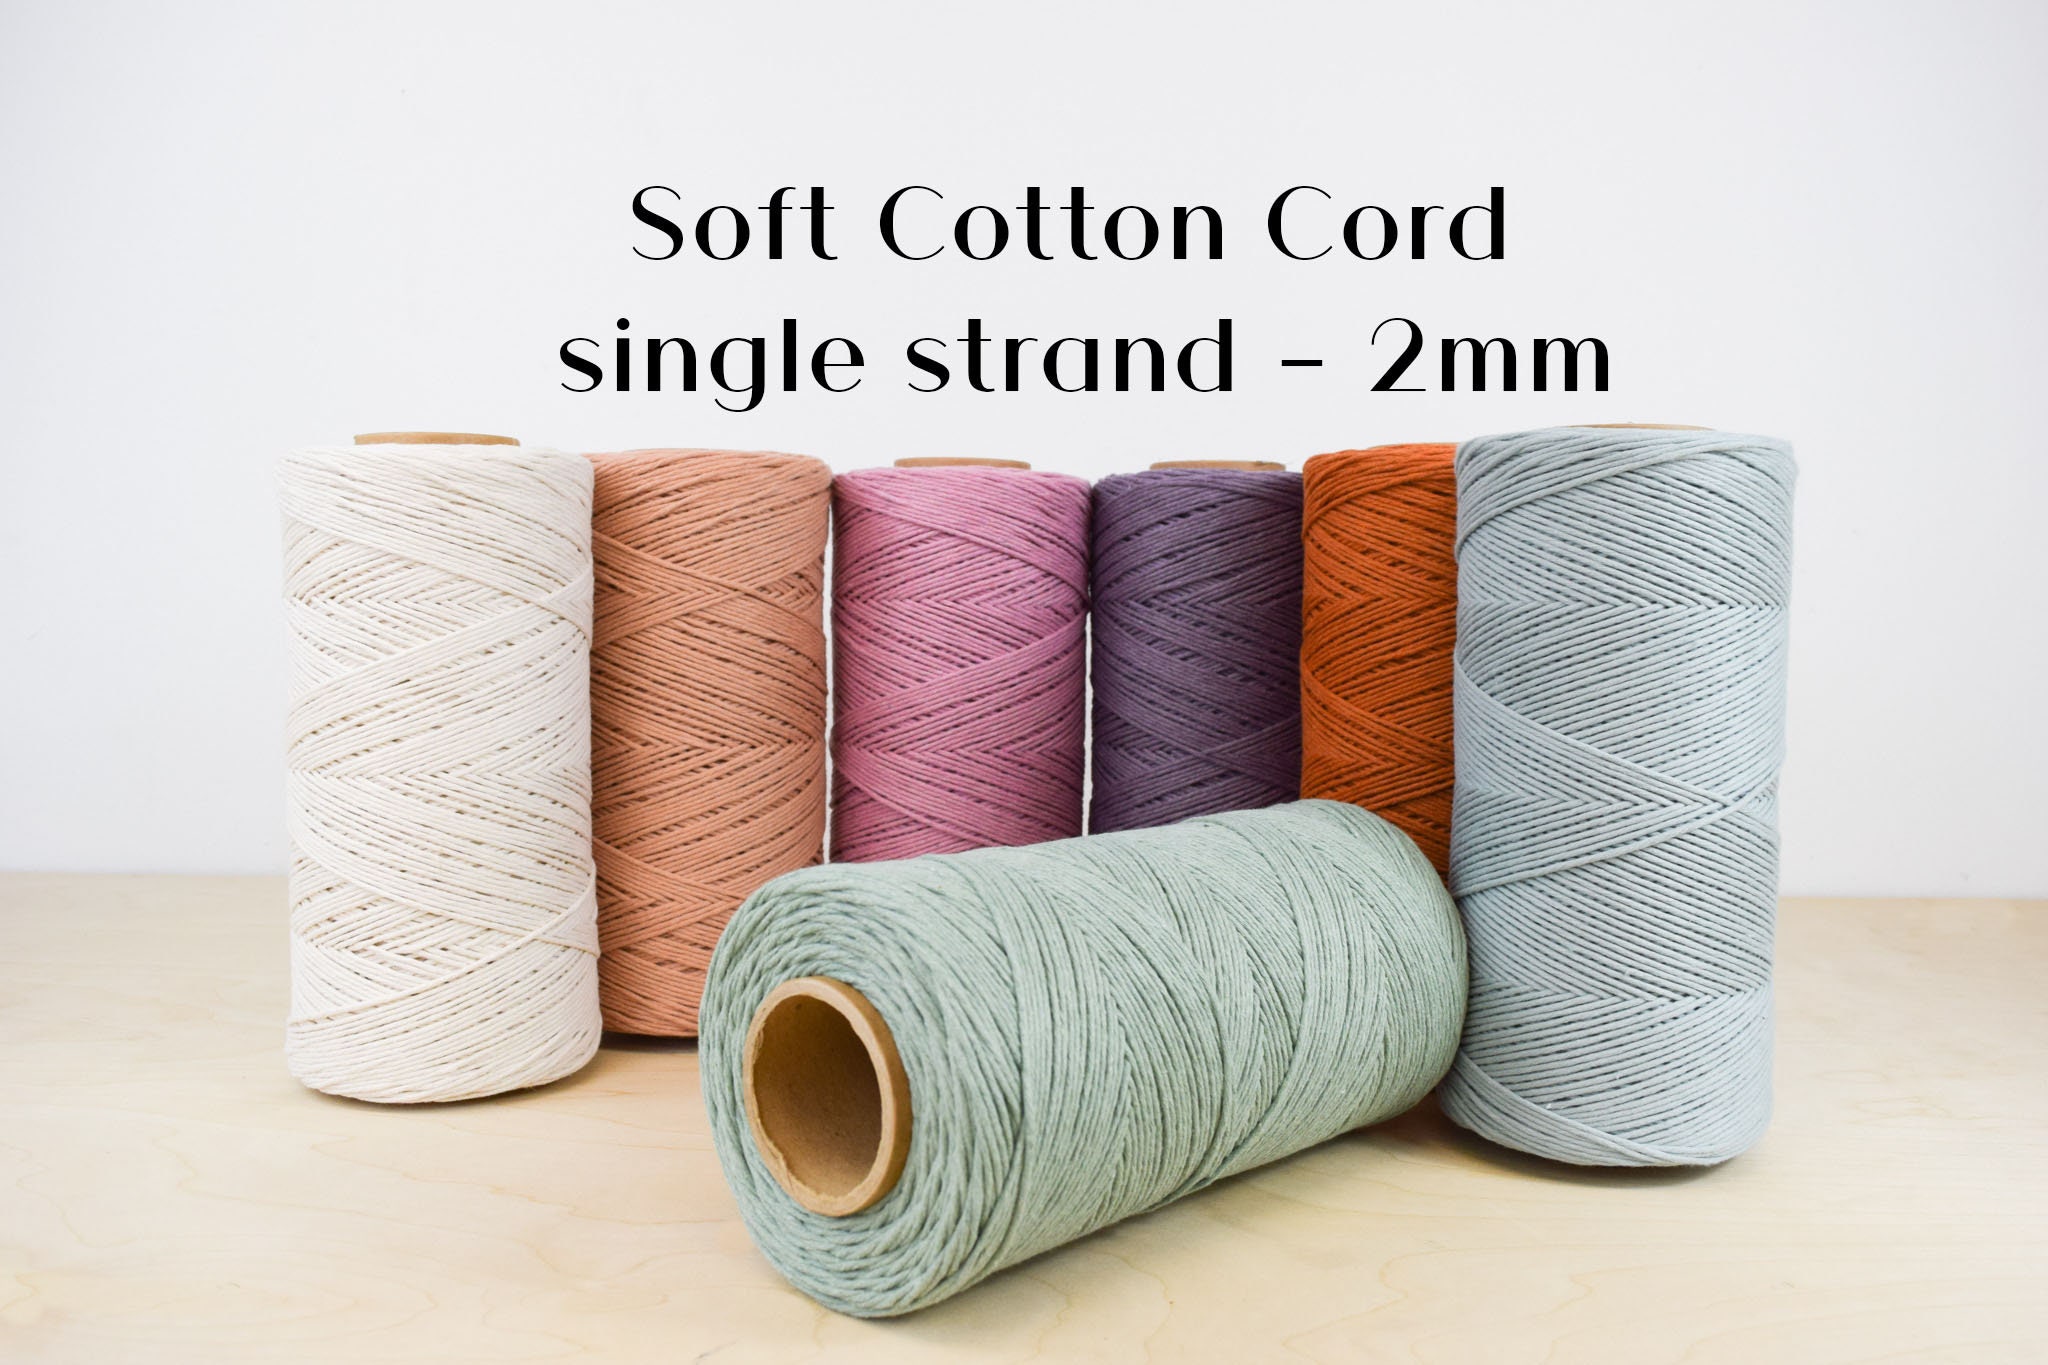 12mm Organic Cotton String Packs. 10 Colour Combinations. Perfect for Small  Weaving, Crafts and Macrame Projects. Super Soft String 